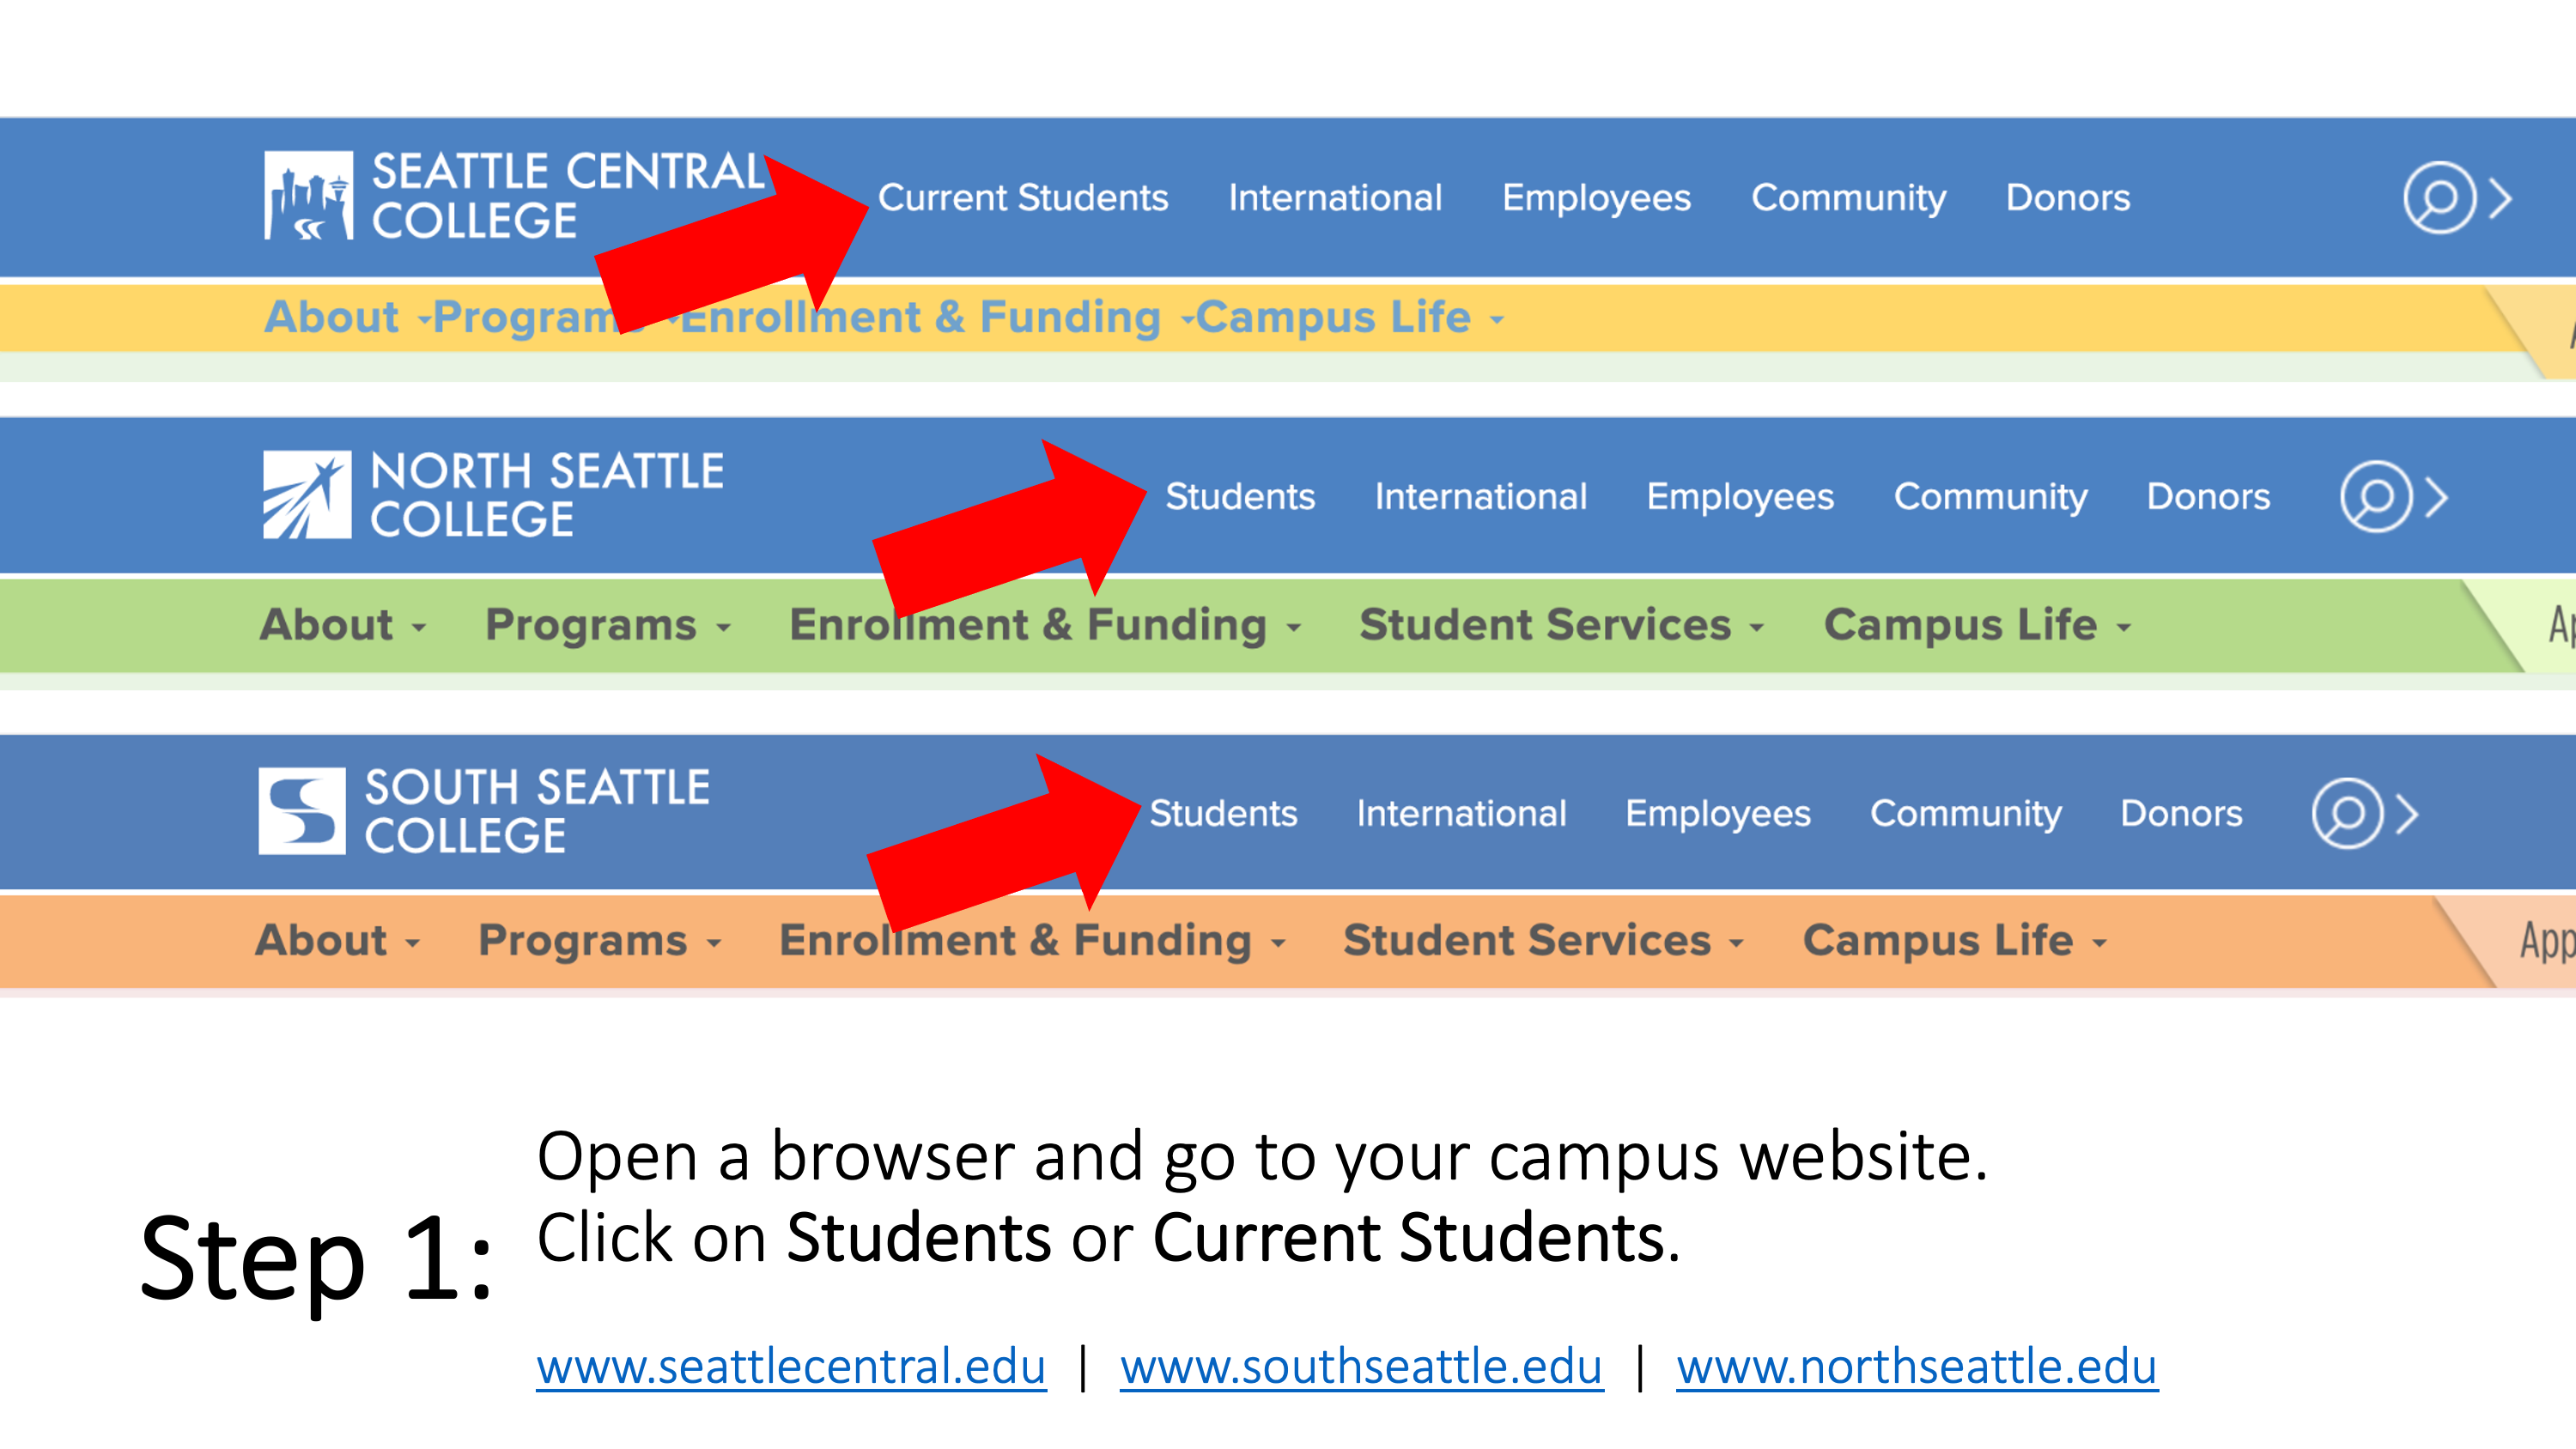 Open a browser and go to your campus website.  Click on Students or Current Students. www.seattlecentral.edu , www.southseattle.edu , or www.northseattle.edu.